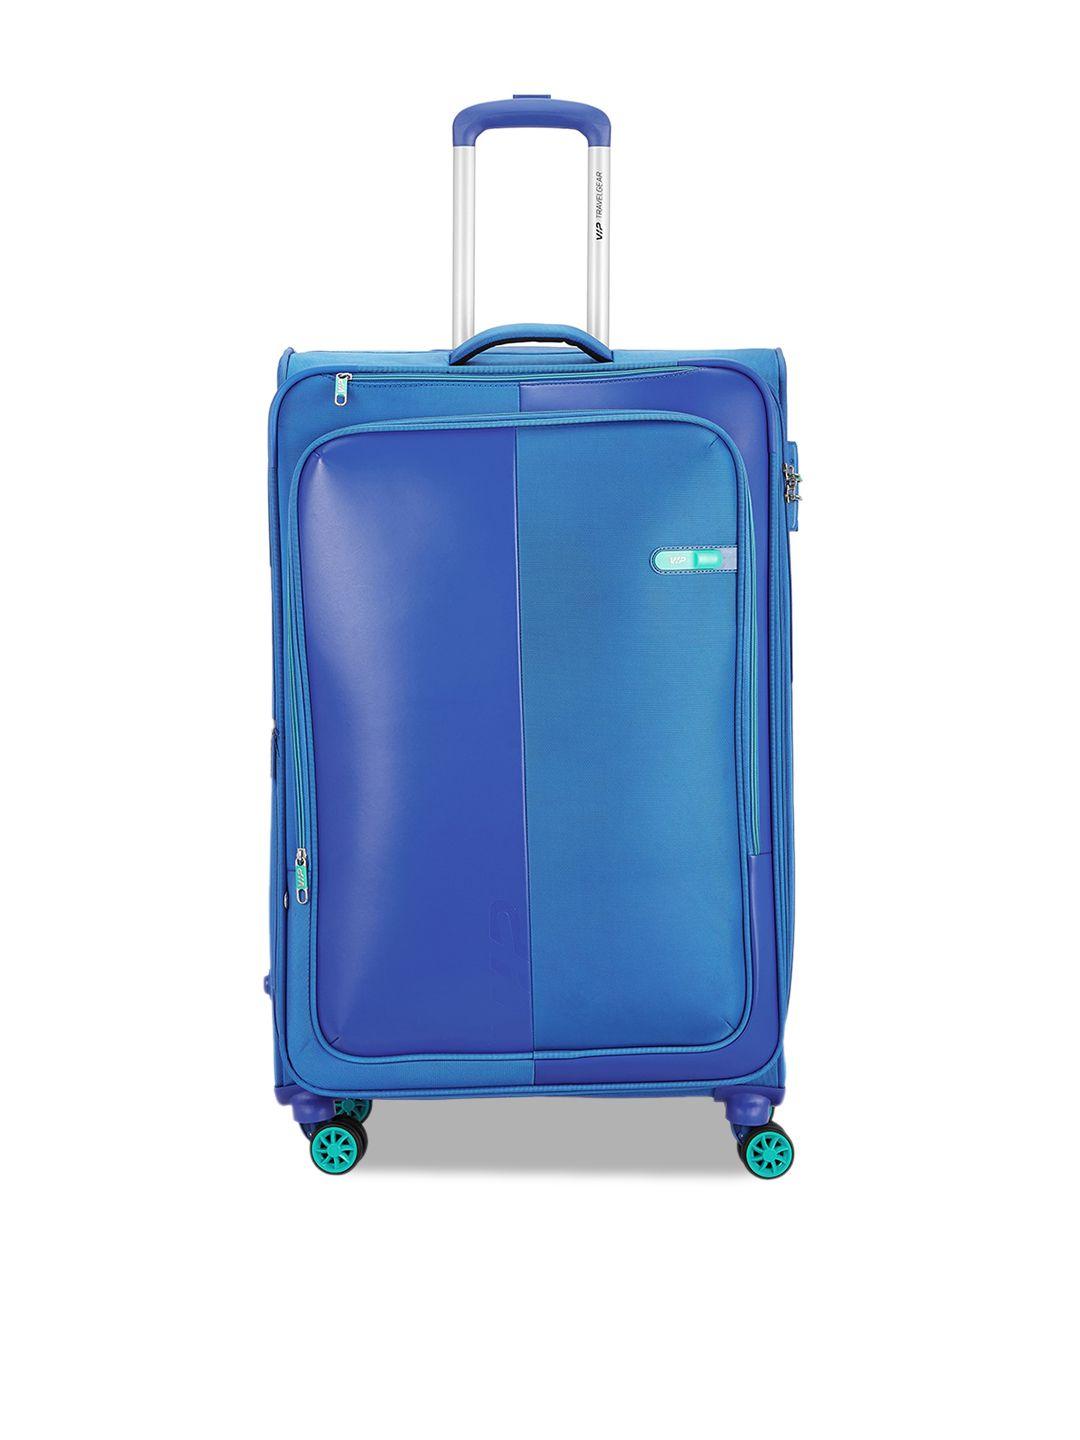 vip soft-sided large trolley suitcase